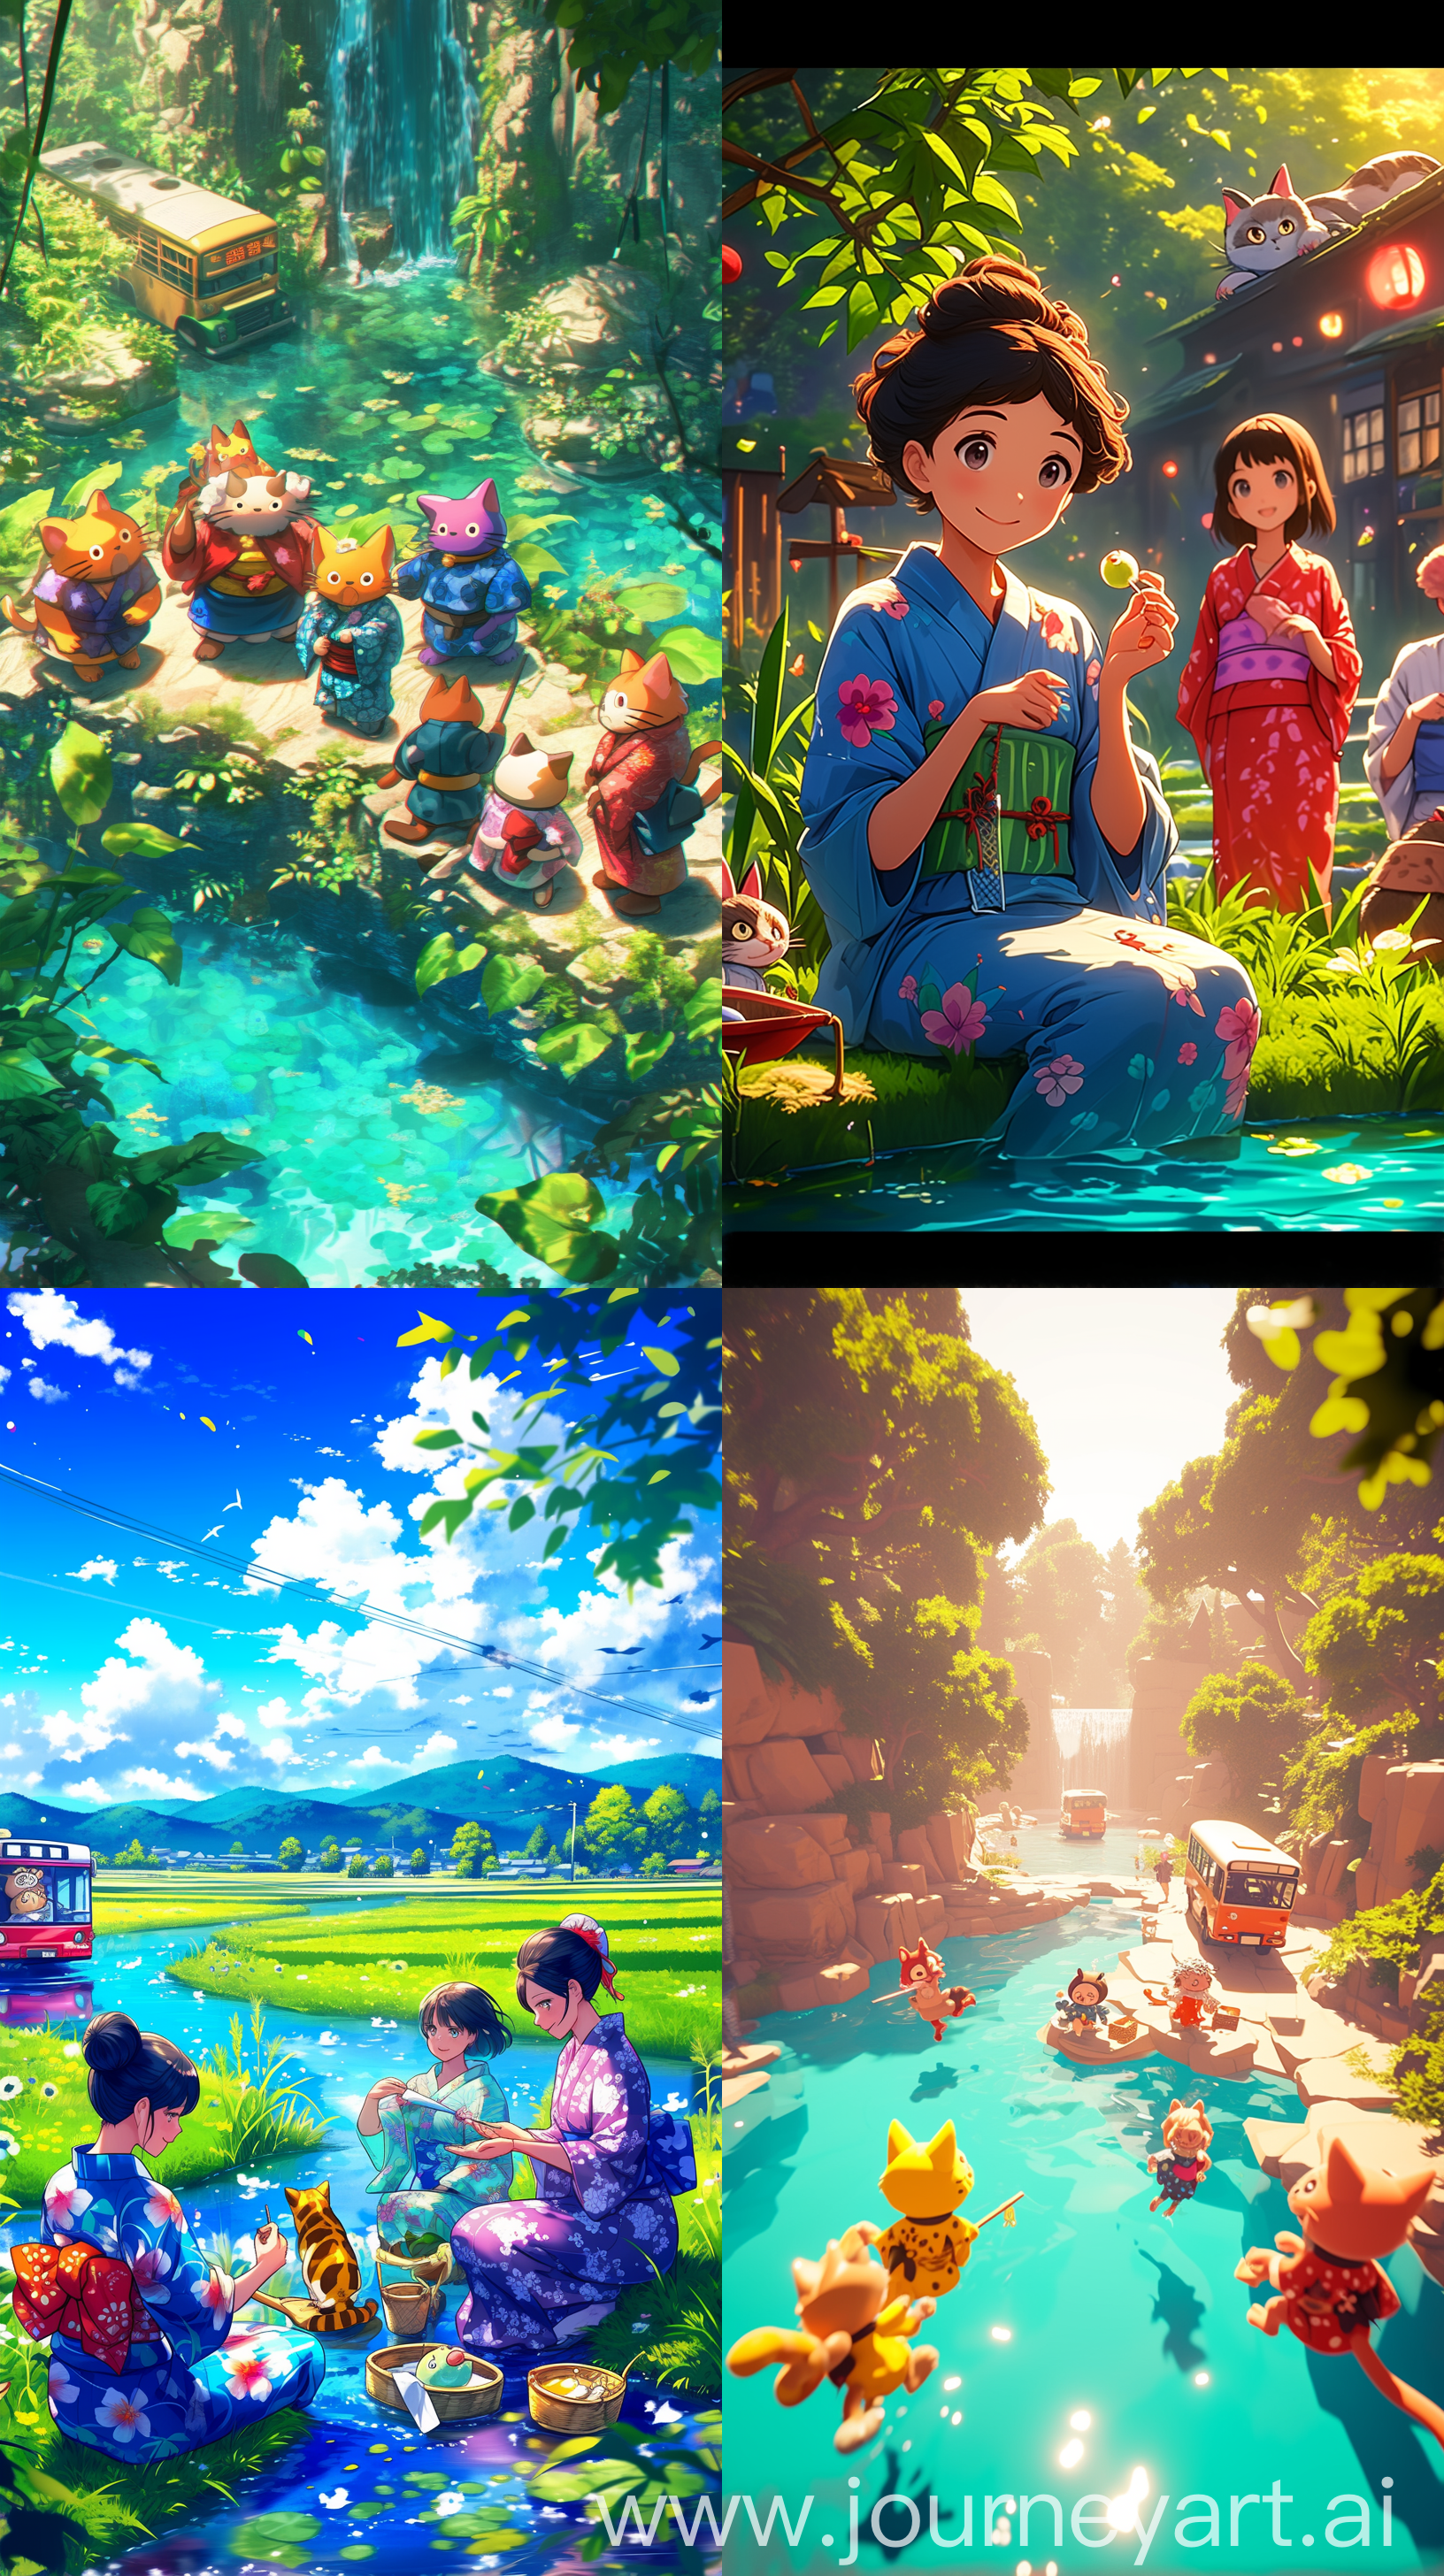 A serene Ghibli Studio summer scene with lush greenery, a crystal-clear river flowing gently, colorful Studio Ghibli-style characters in traditional Japanese yukata, adorned with delicate floral patterns, soft natural lighting, a playful cat bus in the background, whimsical and fantastical, reminiscent of Hayao Miyazaki's magical worlds --s 150 --ar 9:16 --c 5 --niji 6